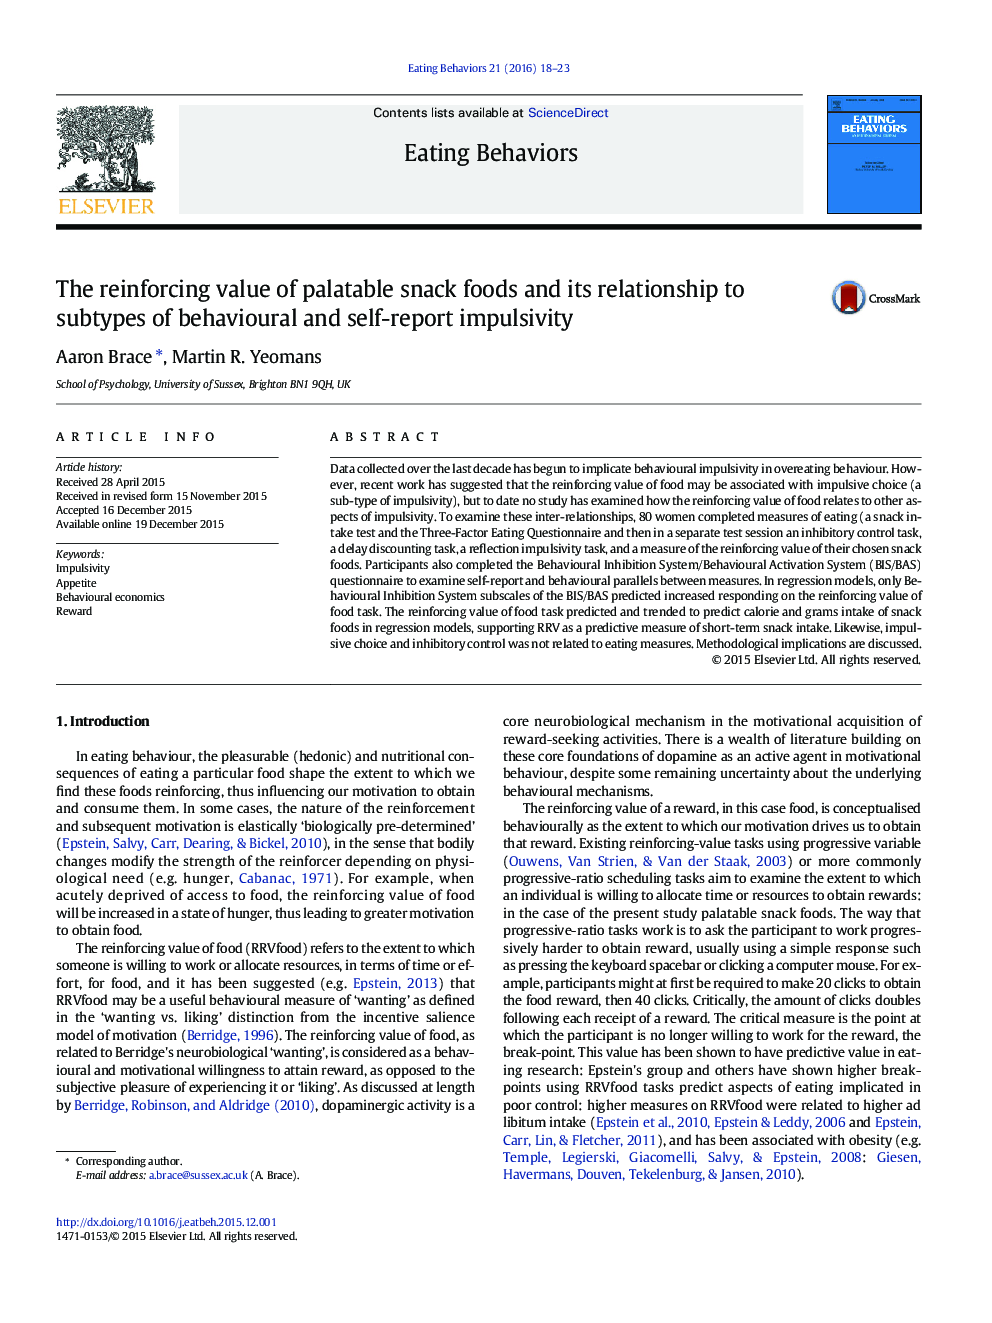 The reinforcing value of palatable snack foods and its relationship to subtypes of behavioural and self-report impulsivity